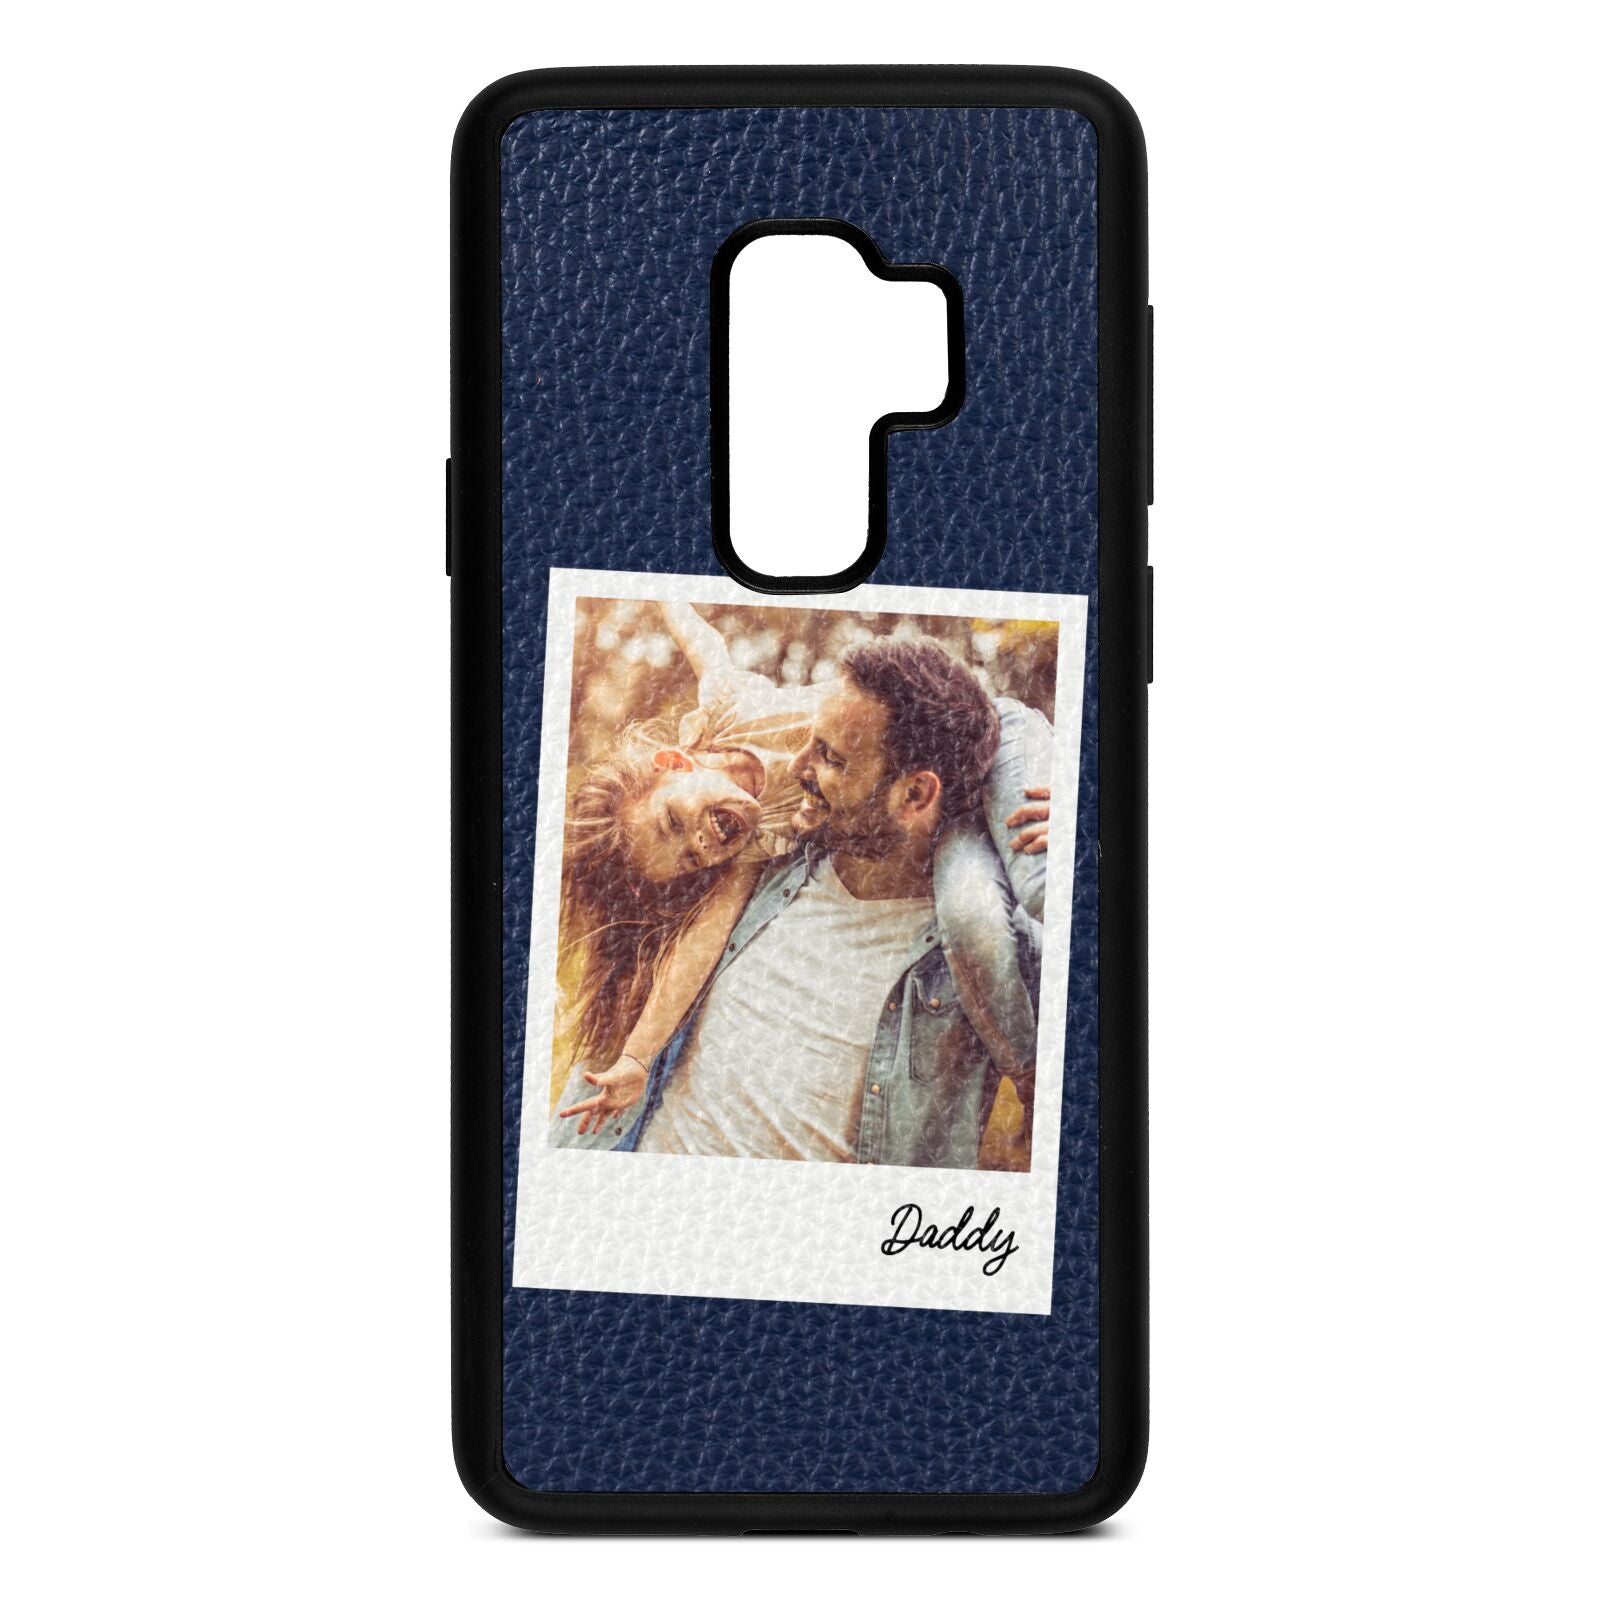 Fathers Day Photo Navy Blue Pebble Leather Samsung S9 Plus Case